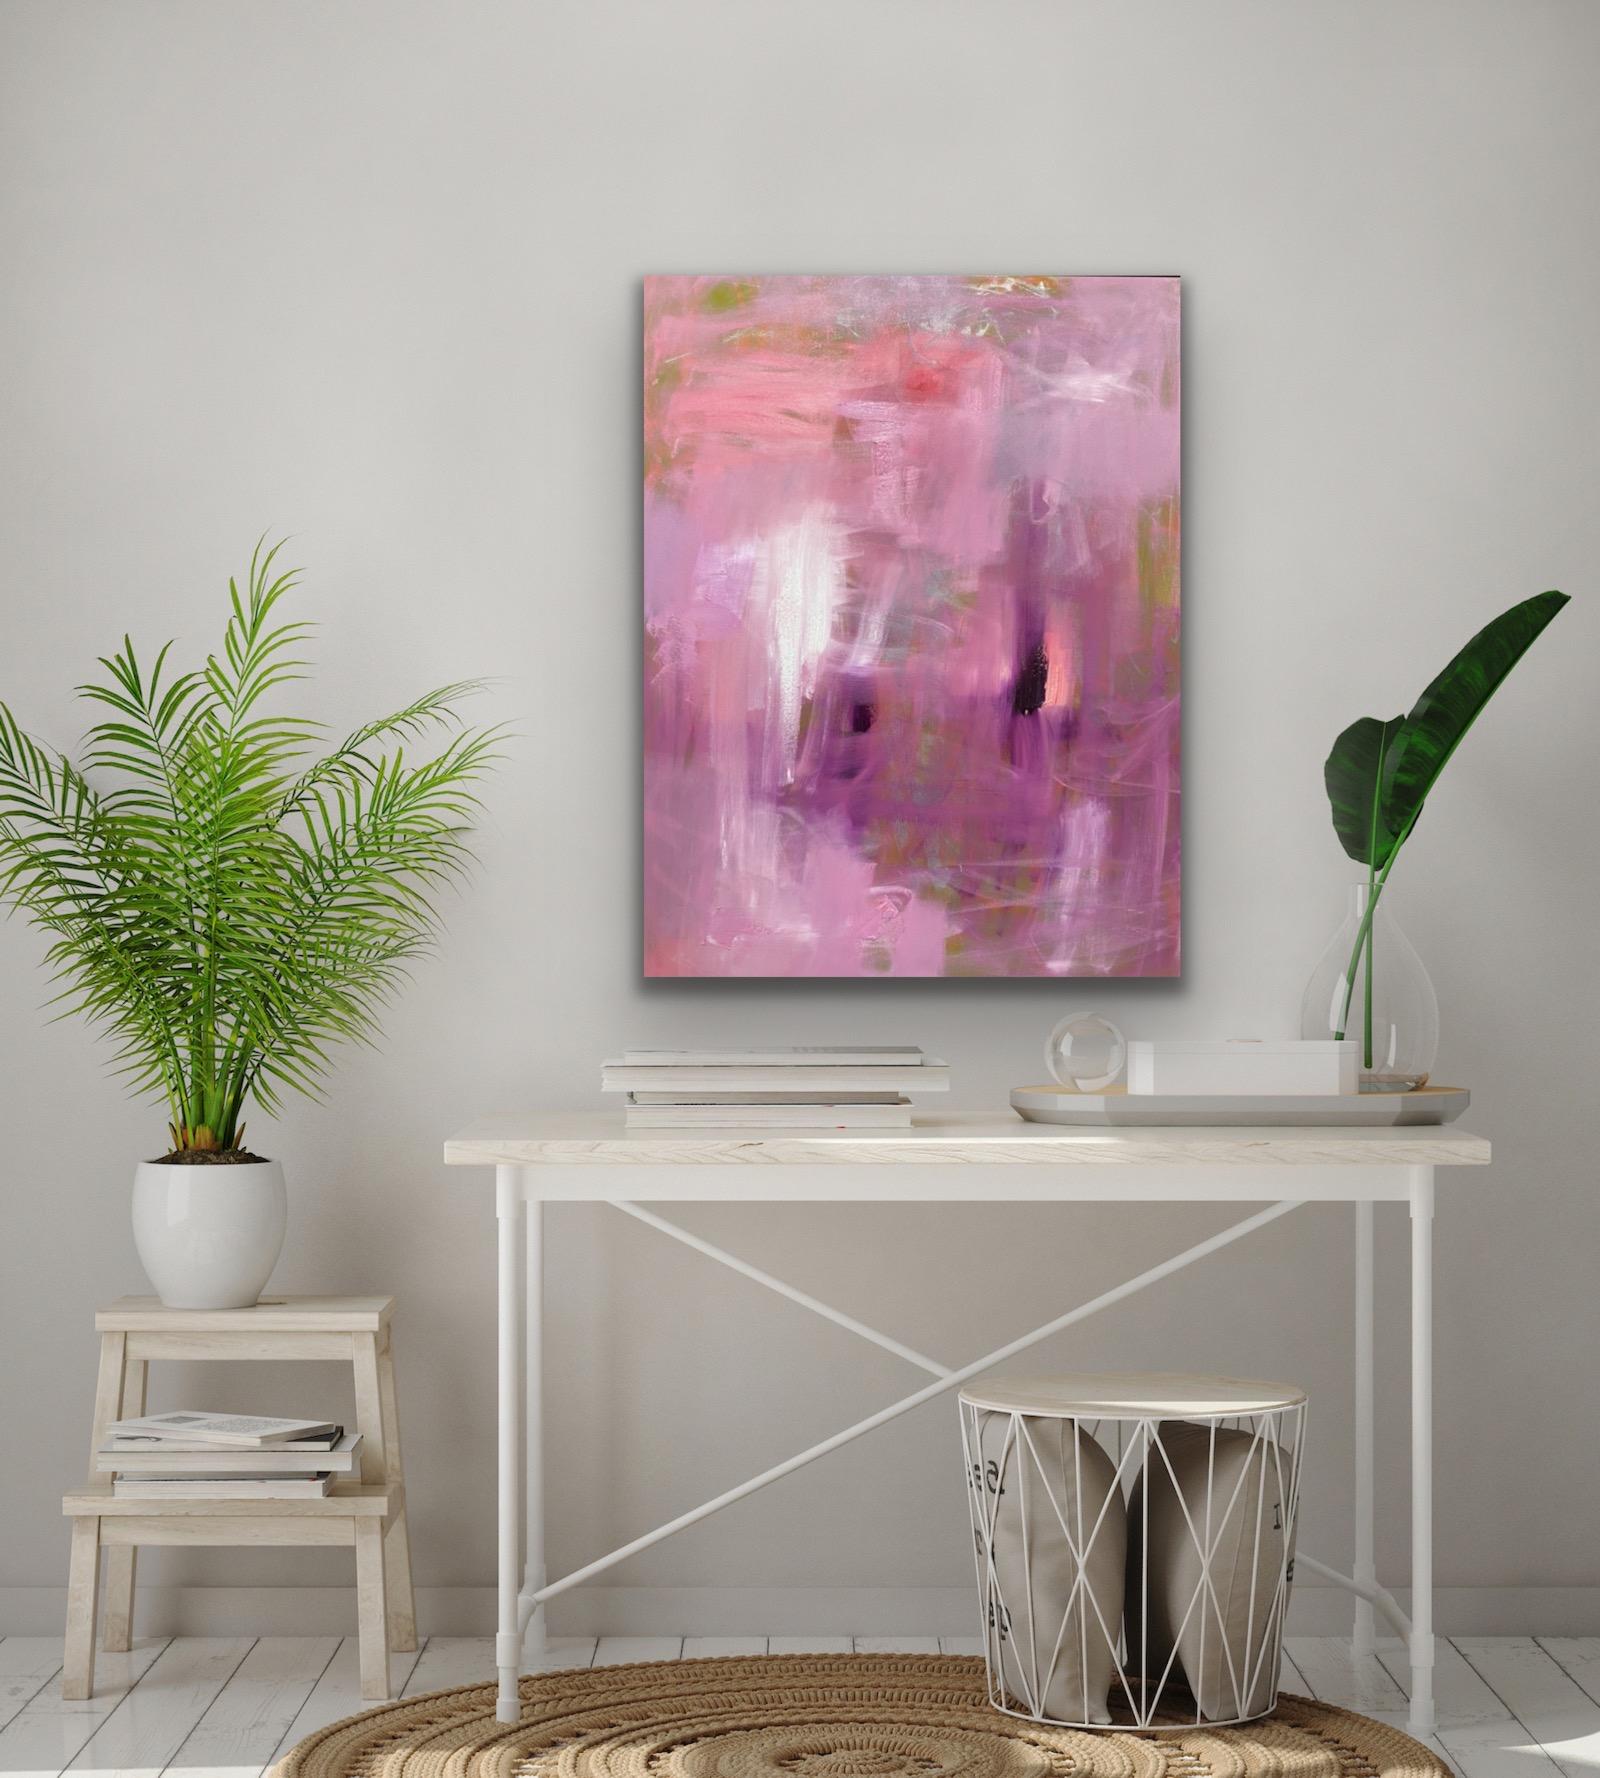 Original Oil Painting on Canvas Titled: Pink Moon - Brown Abstract Painting by Mirtha Moreno